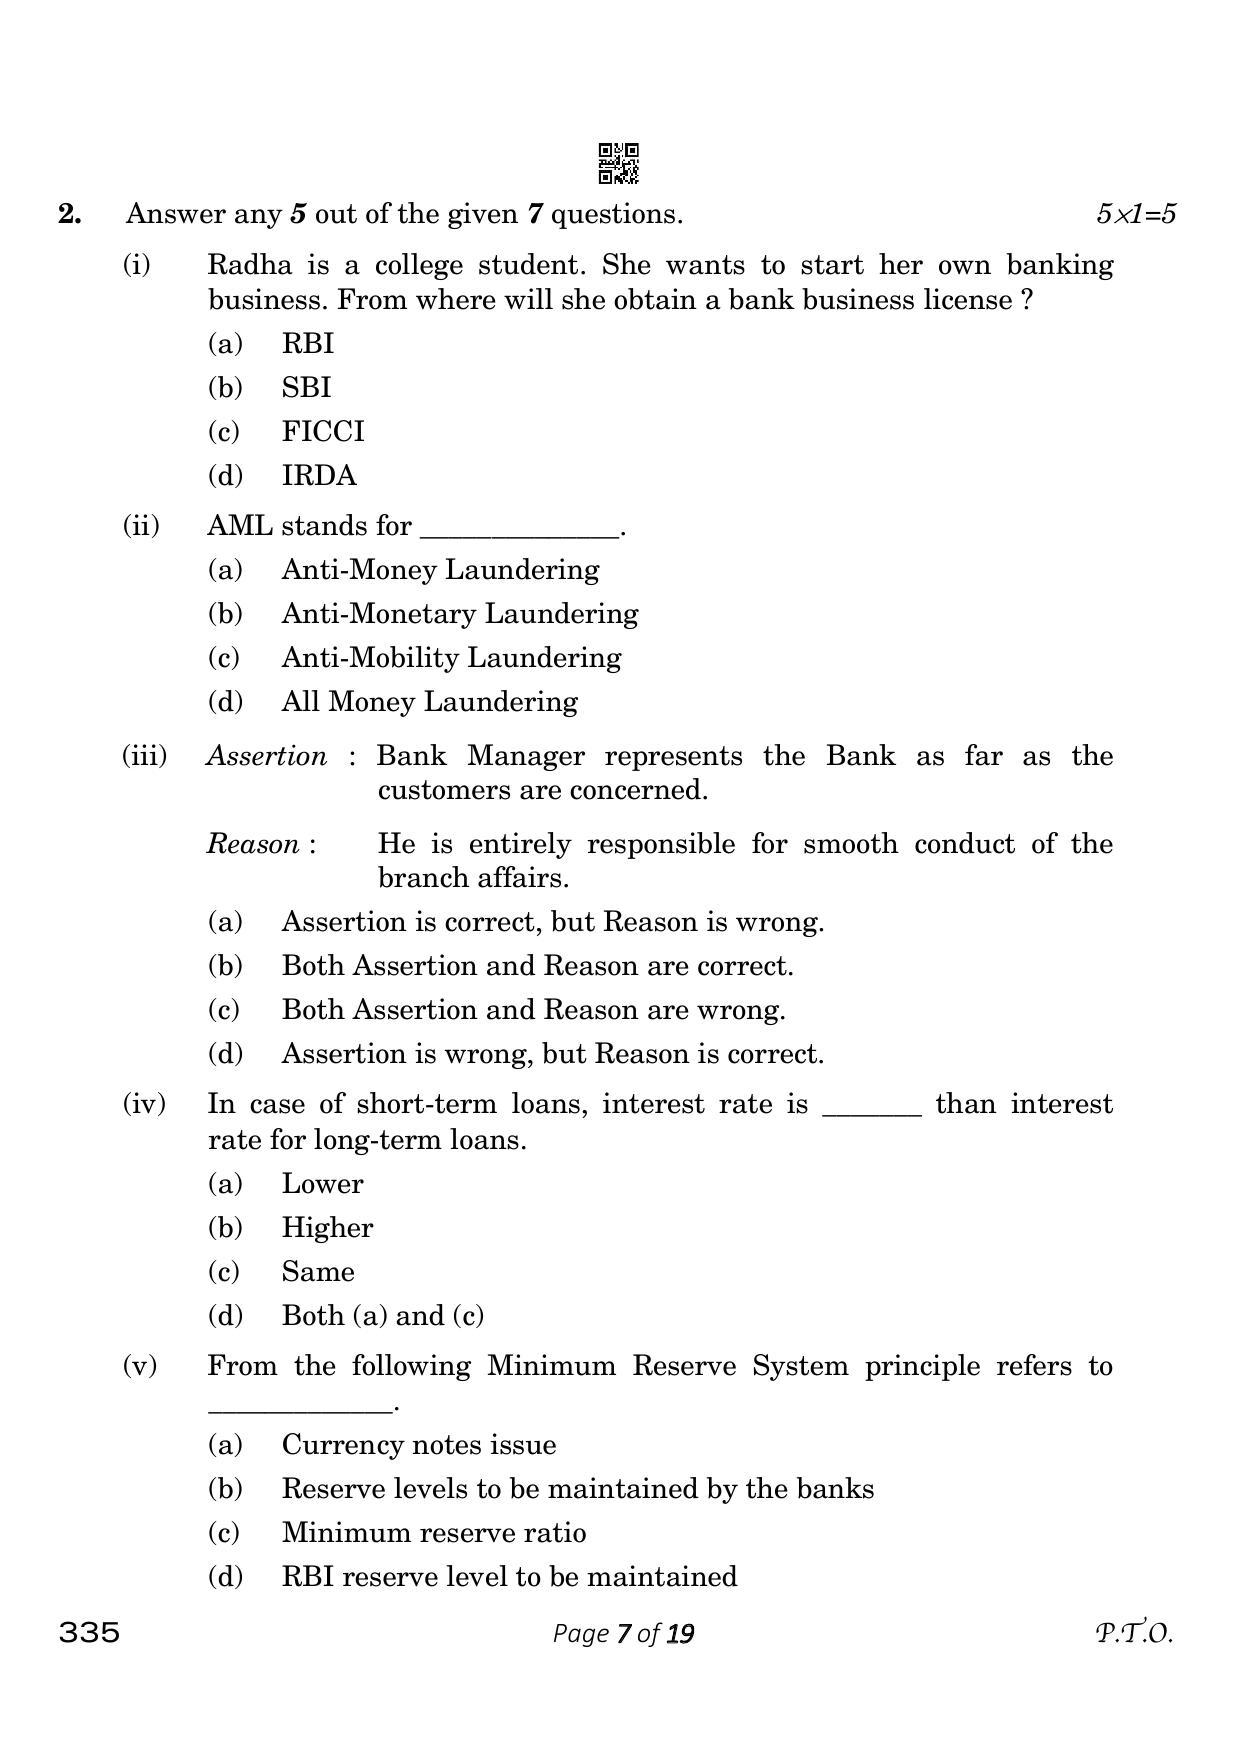 CBSE Class 12 335_Banking 2023 Question Paper - Page 7